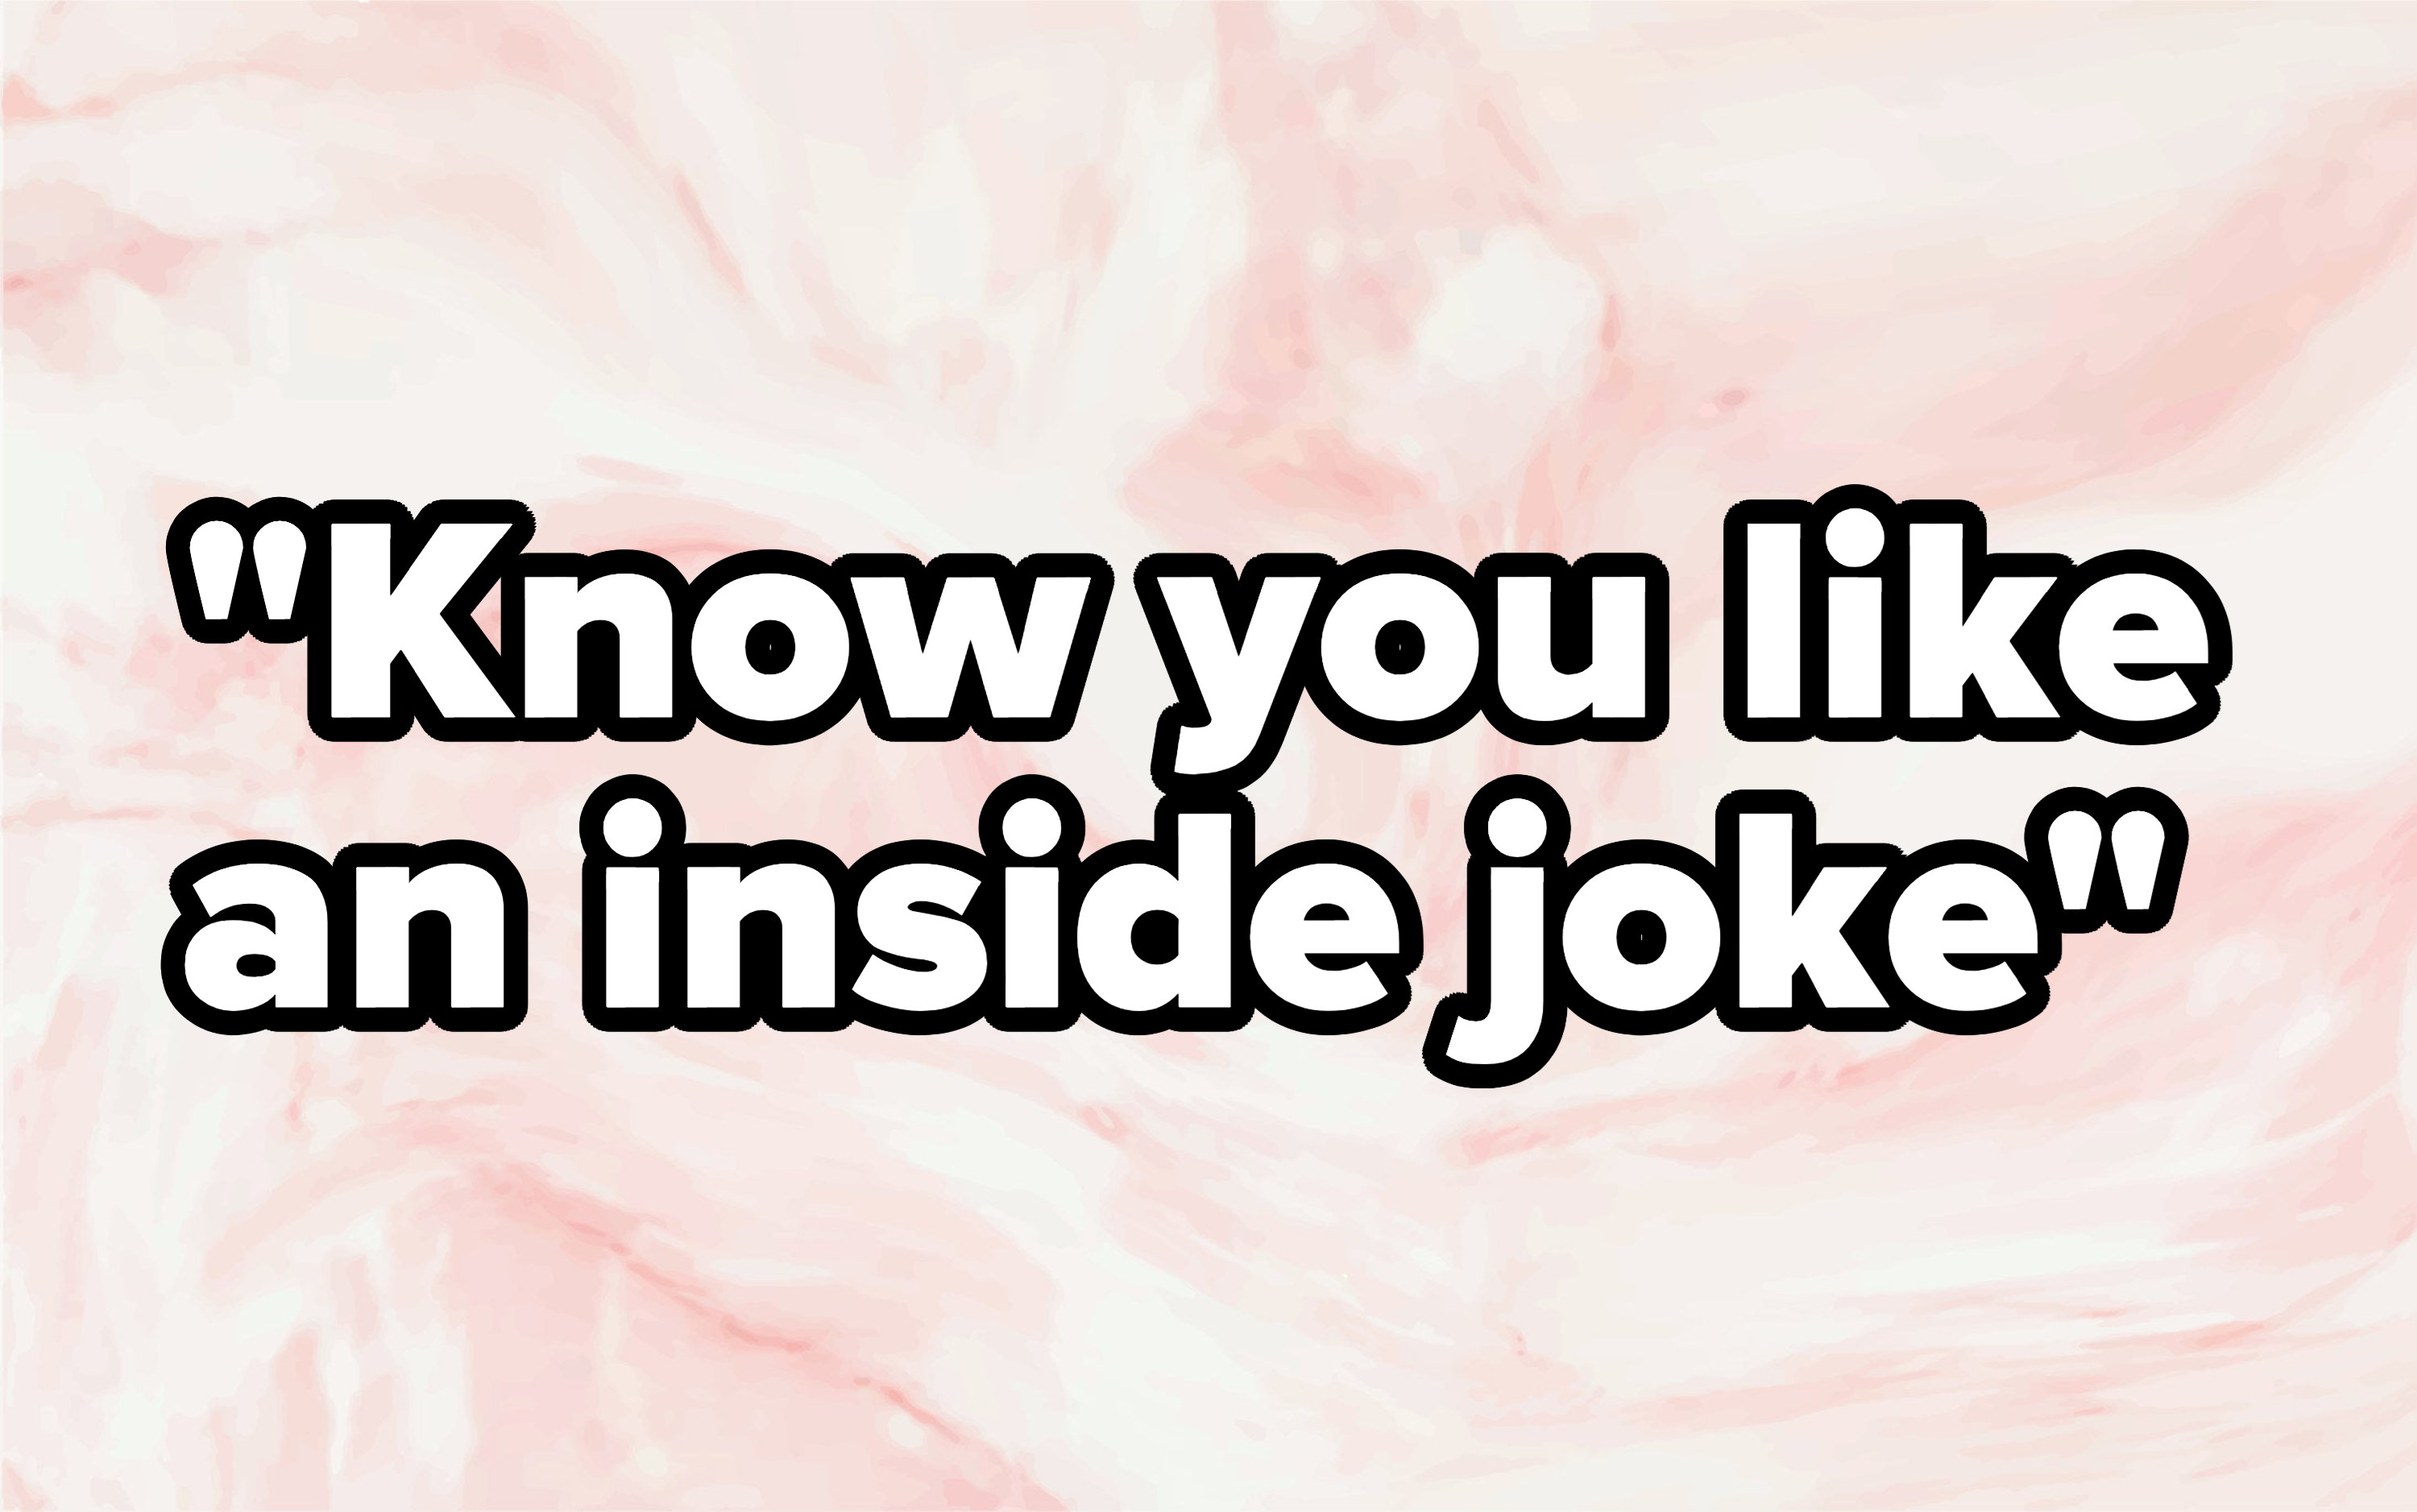 &quot;Know you like an inside joke&quot; written over a marble design